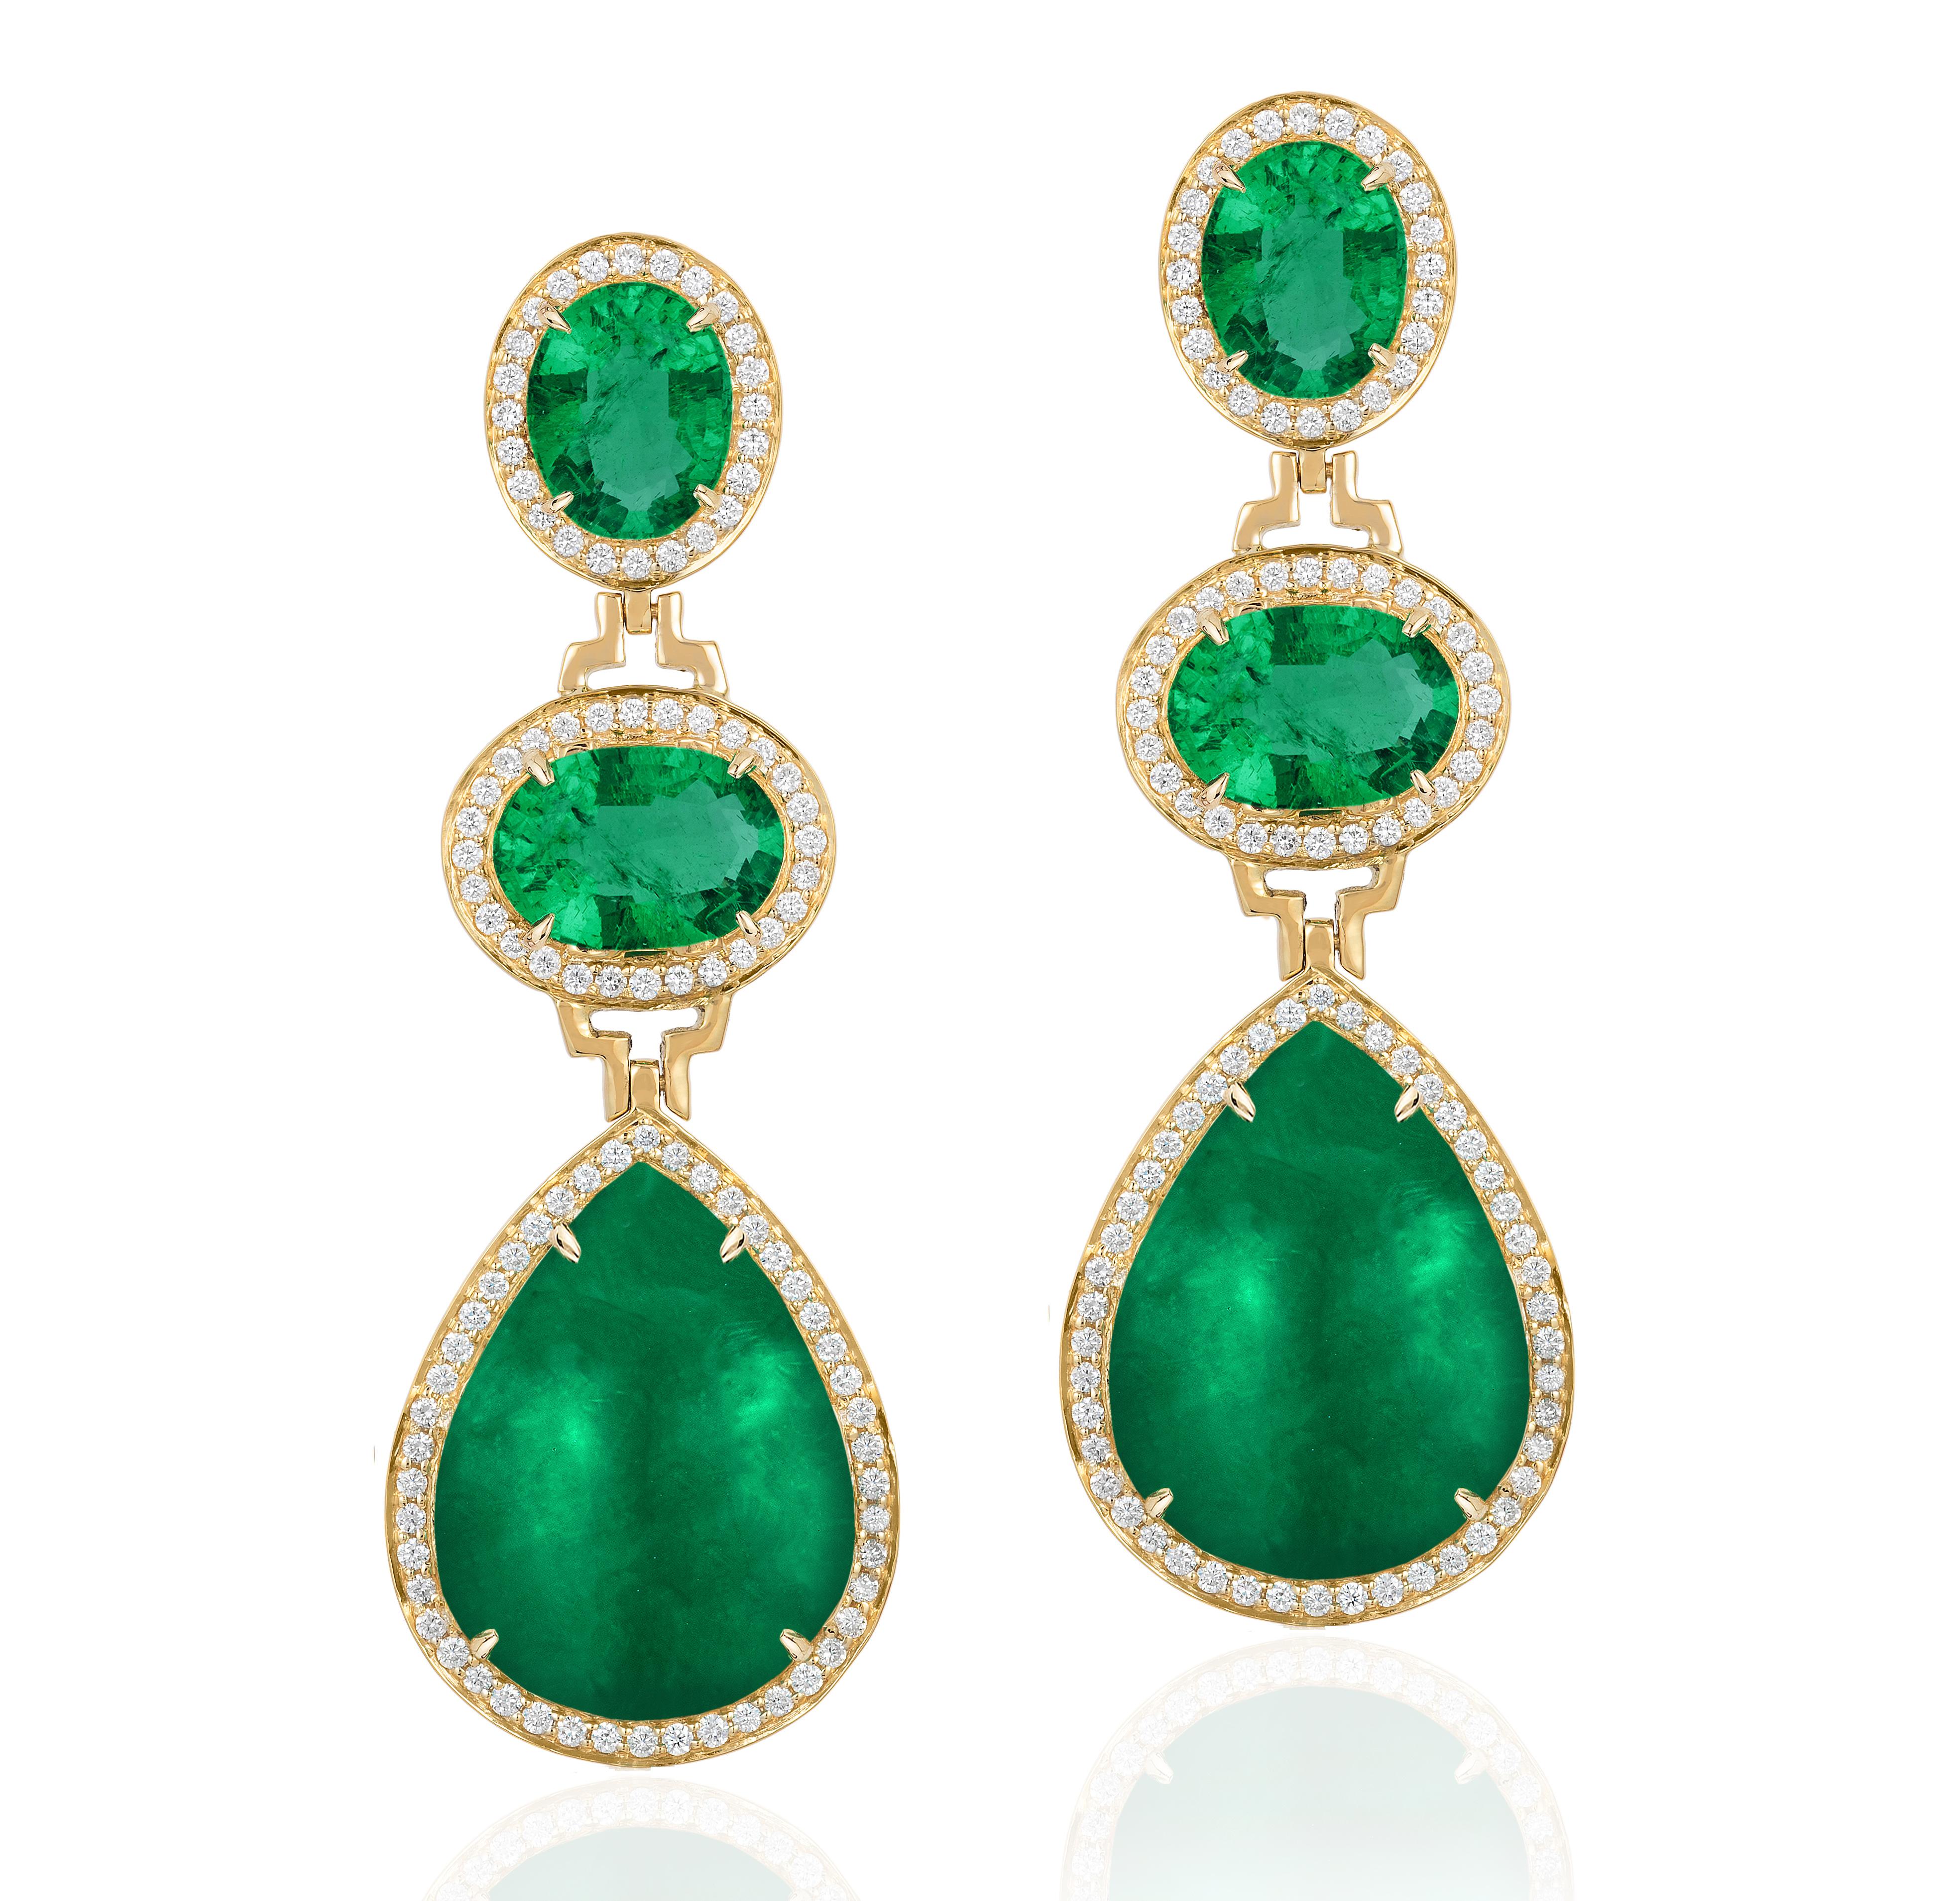 These 3 Tier Faceted Oval and Pear Shape Emerald Drop Earrings with Diamonds are exquisite pieces of jewelry from the luxurious 'G-One' Collection. Crafted in 18K yellow gold, these earrings are a stunning blend of elegance and sophistication. The